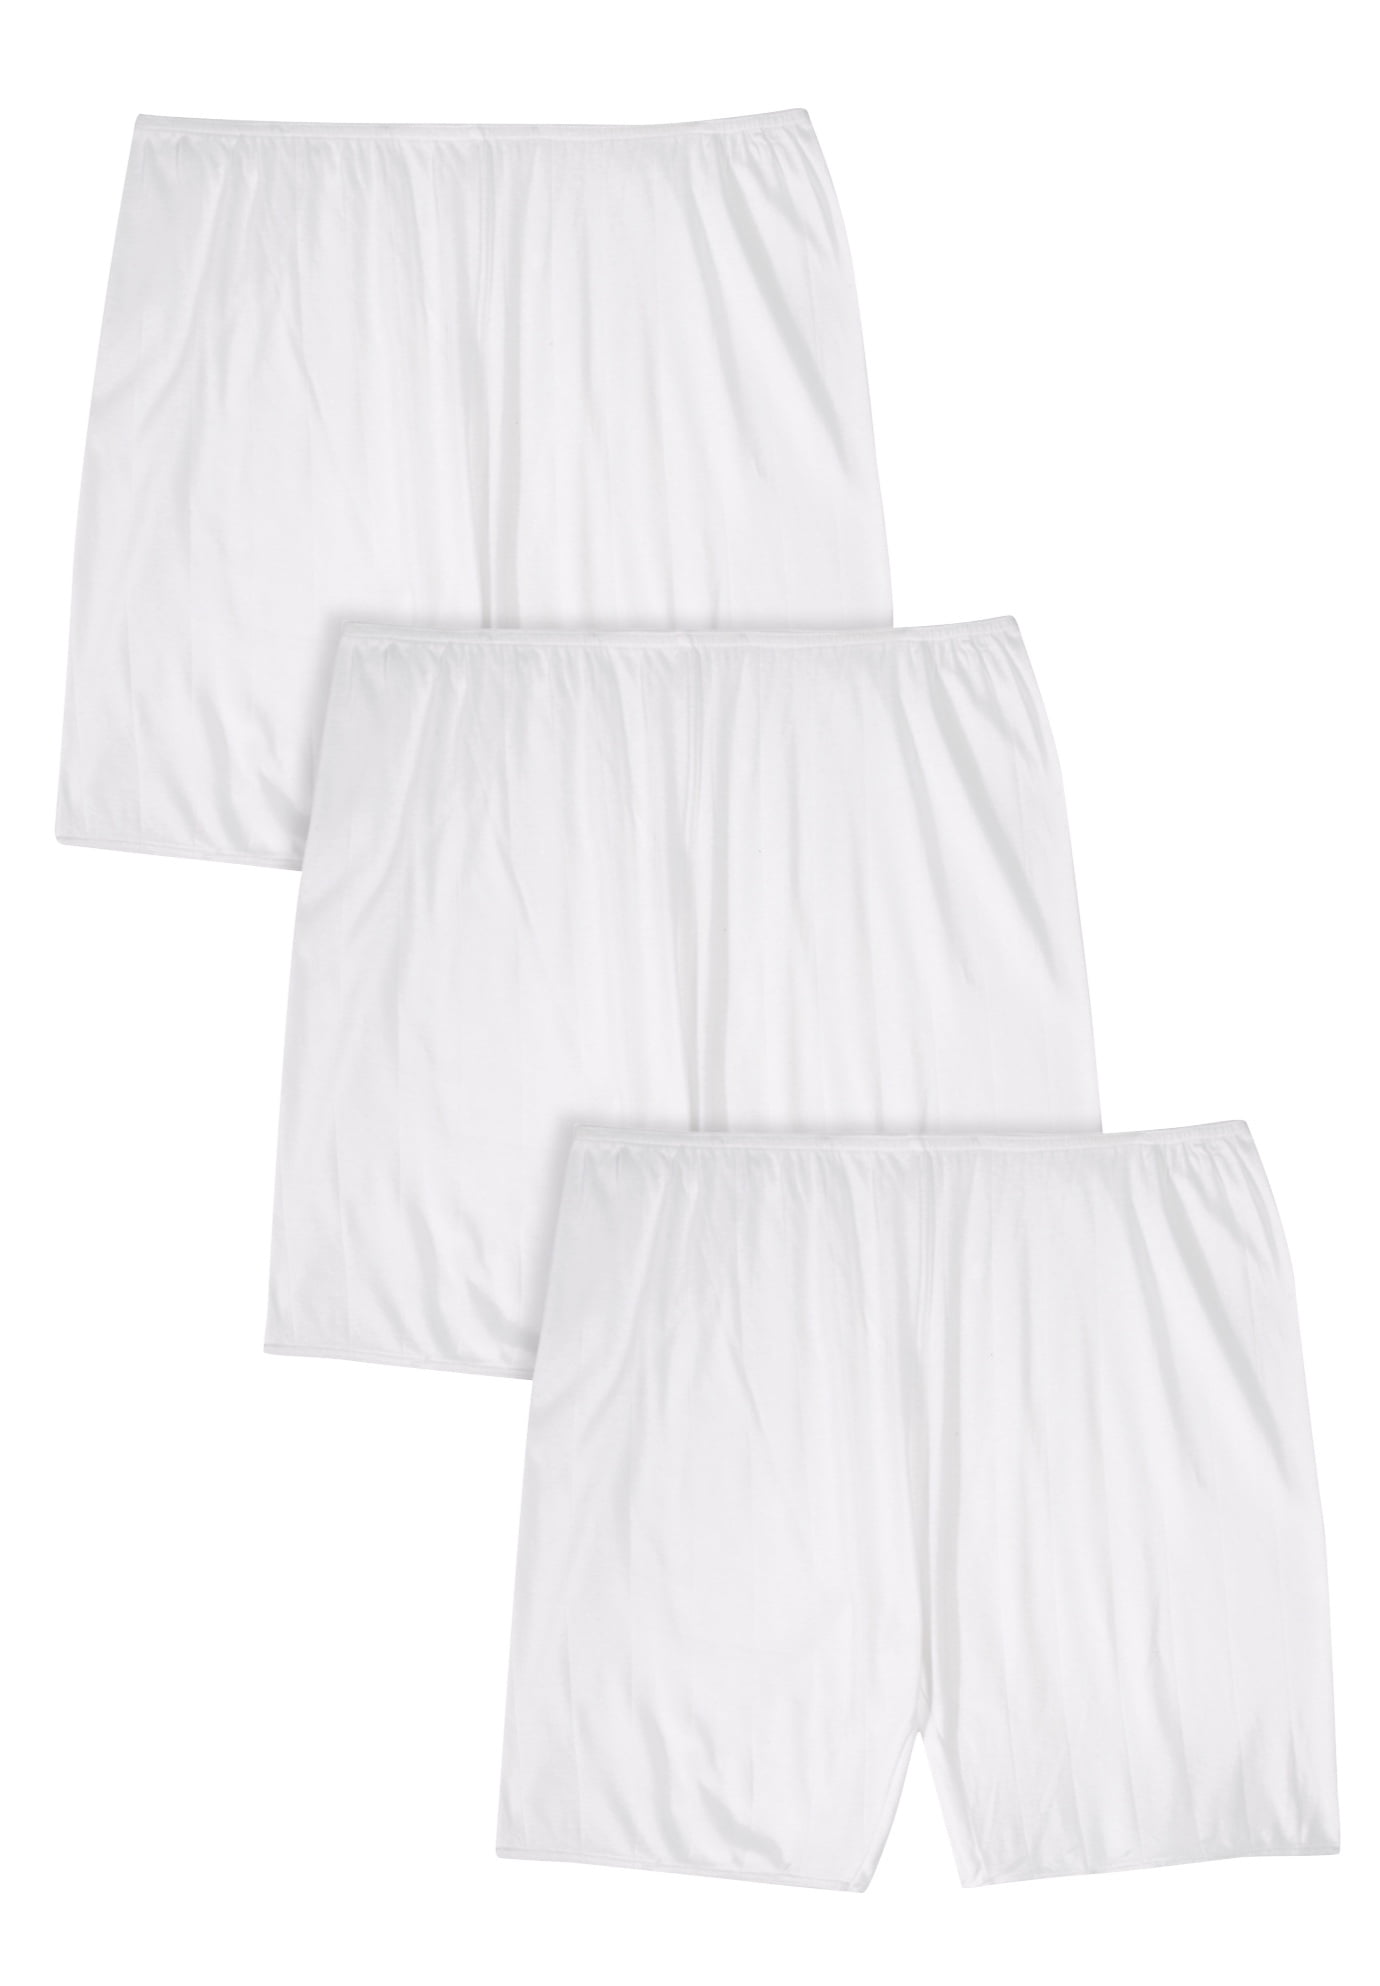 Comfort Choice Womens Plus Size 3-Pack Cotton Bloomer 